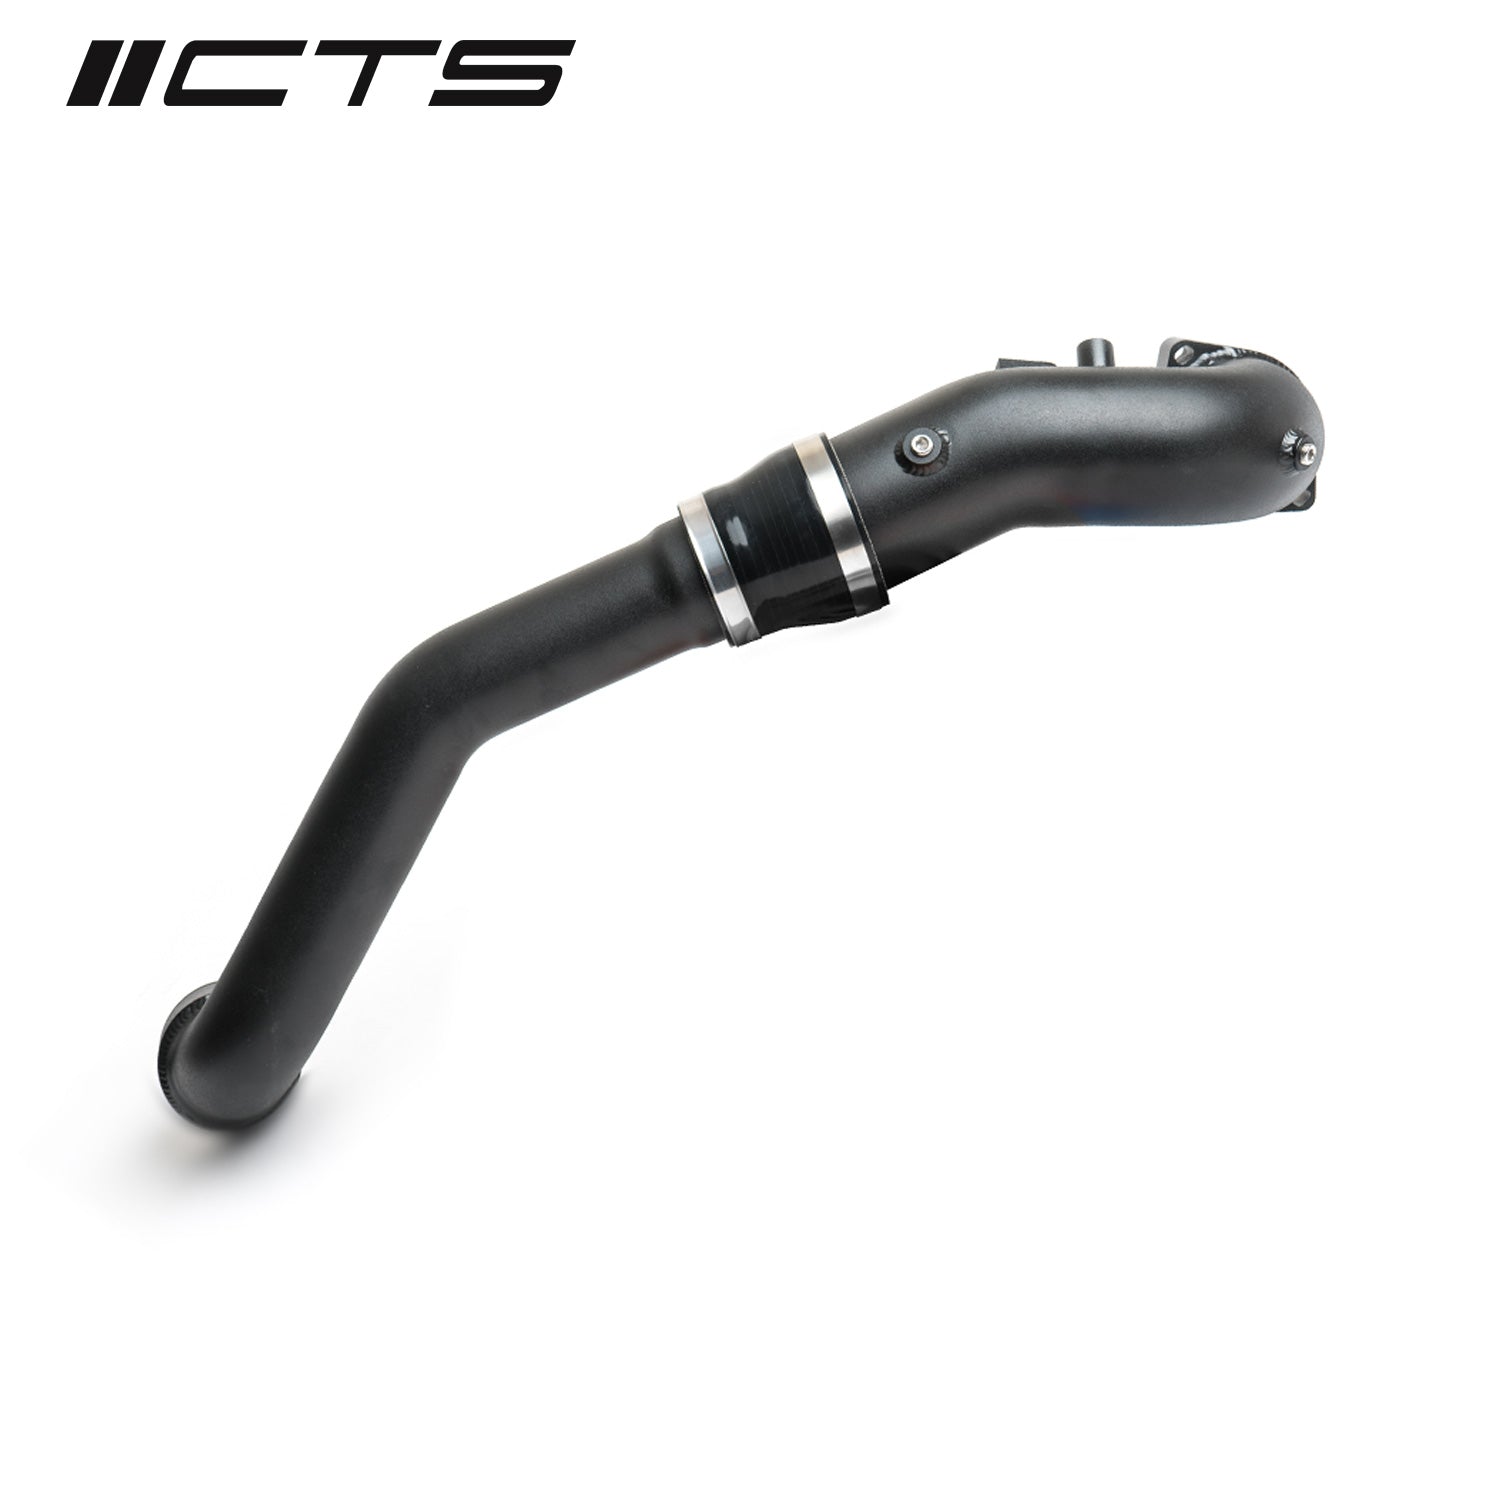 CTS TURBO Charge Pipe Upgrade Kit for BMW G01/G02/G05/G07/G11/G20/G29 and A90/A91 Toyota Supra B58C/B58TU 3.0L 2020+